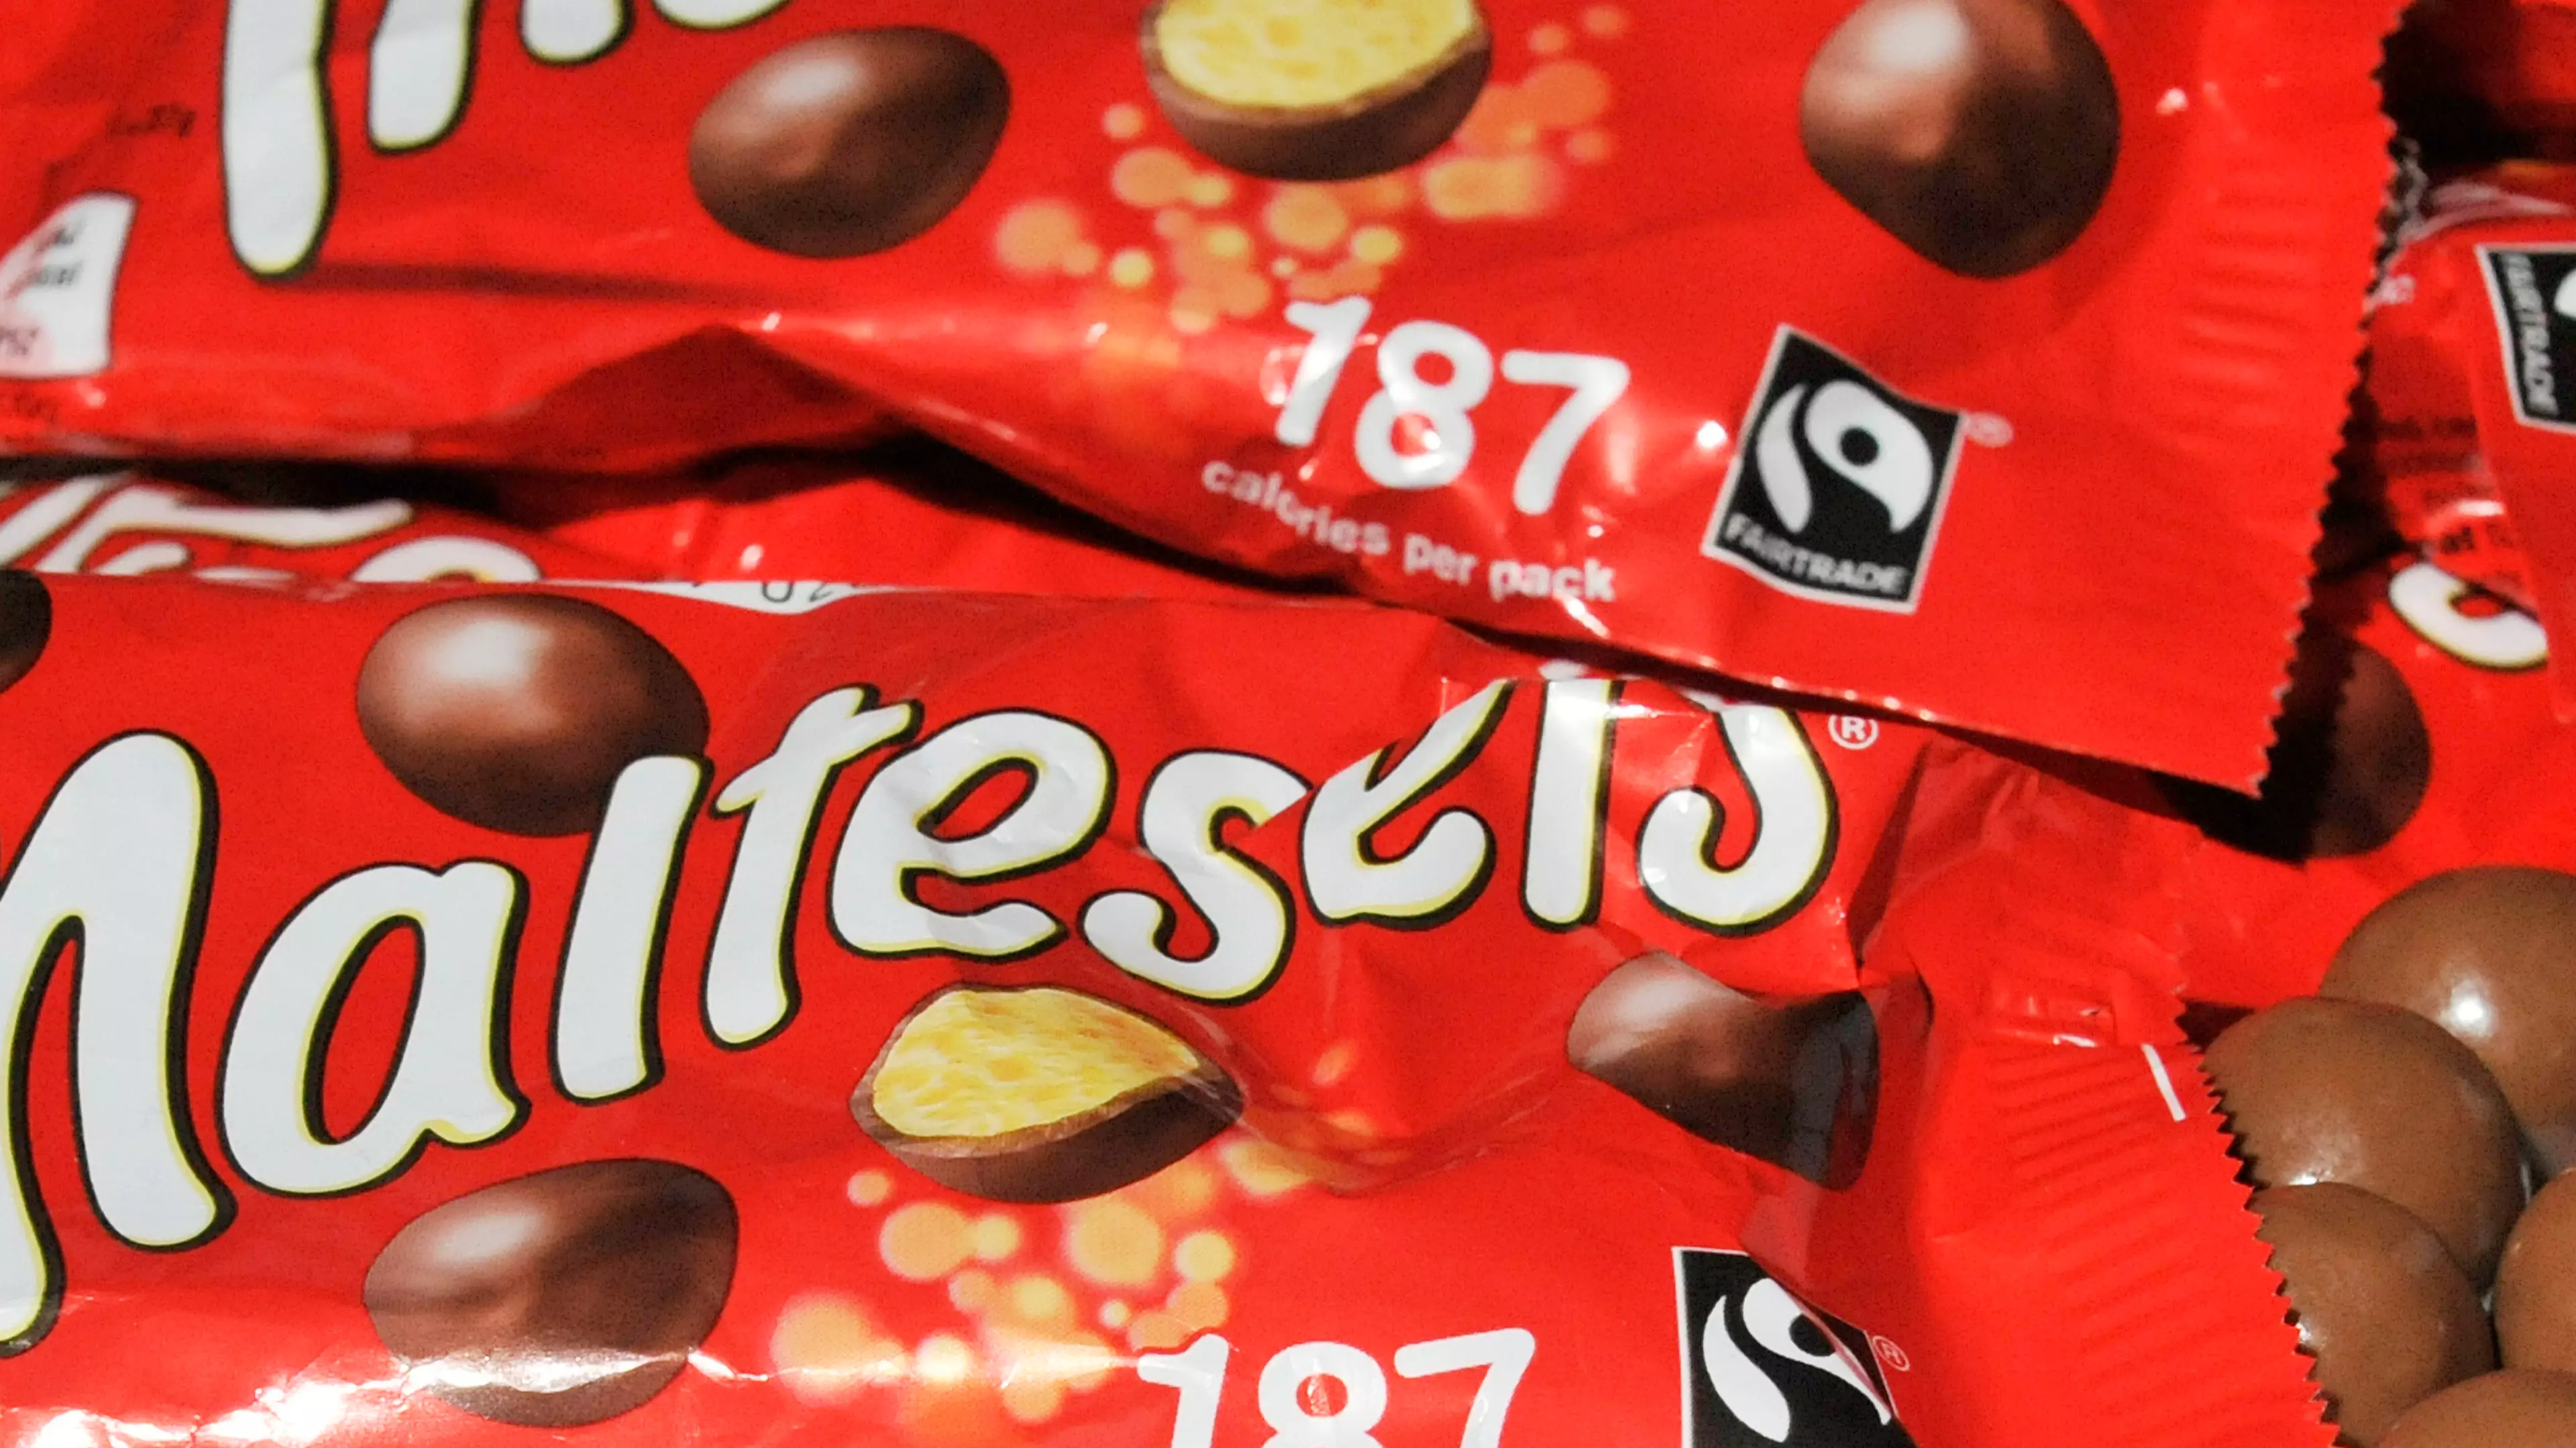 UK Could Be Facing Chocolate Shortage Due To 'Mechanical Glitch' At Mars Factory 